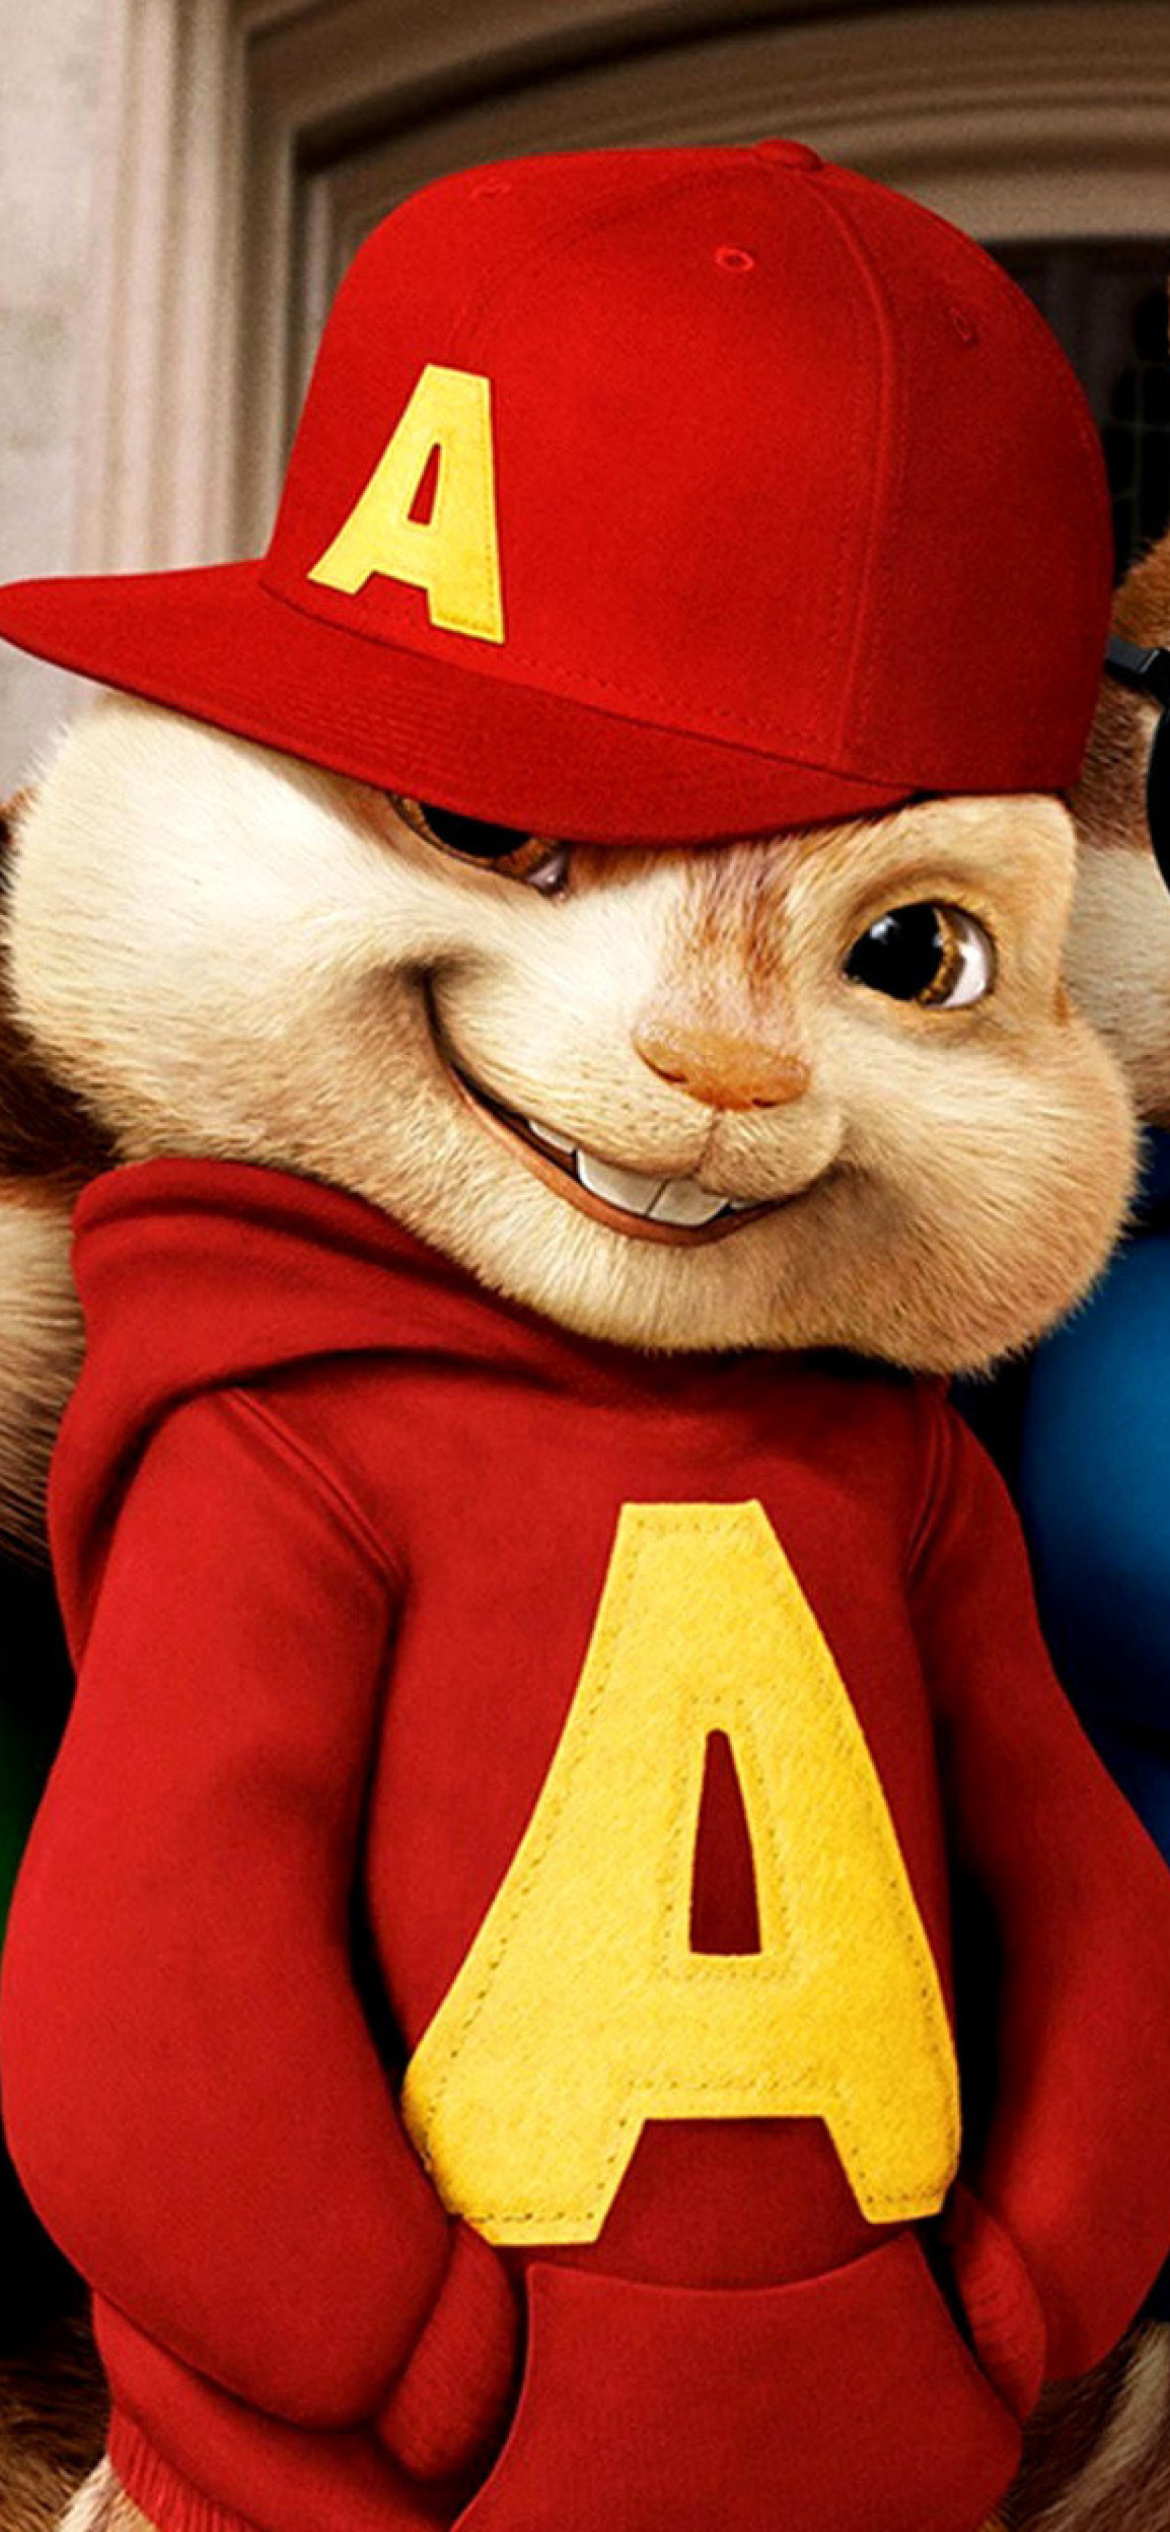 Alvin and the Chipmunks wallpaper 1170x2532